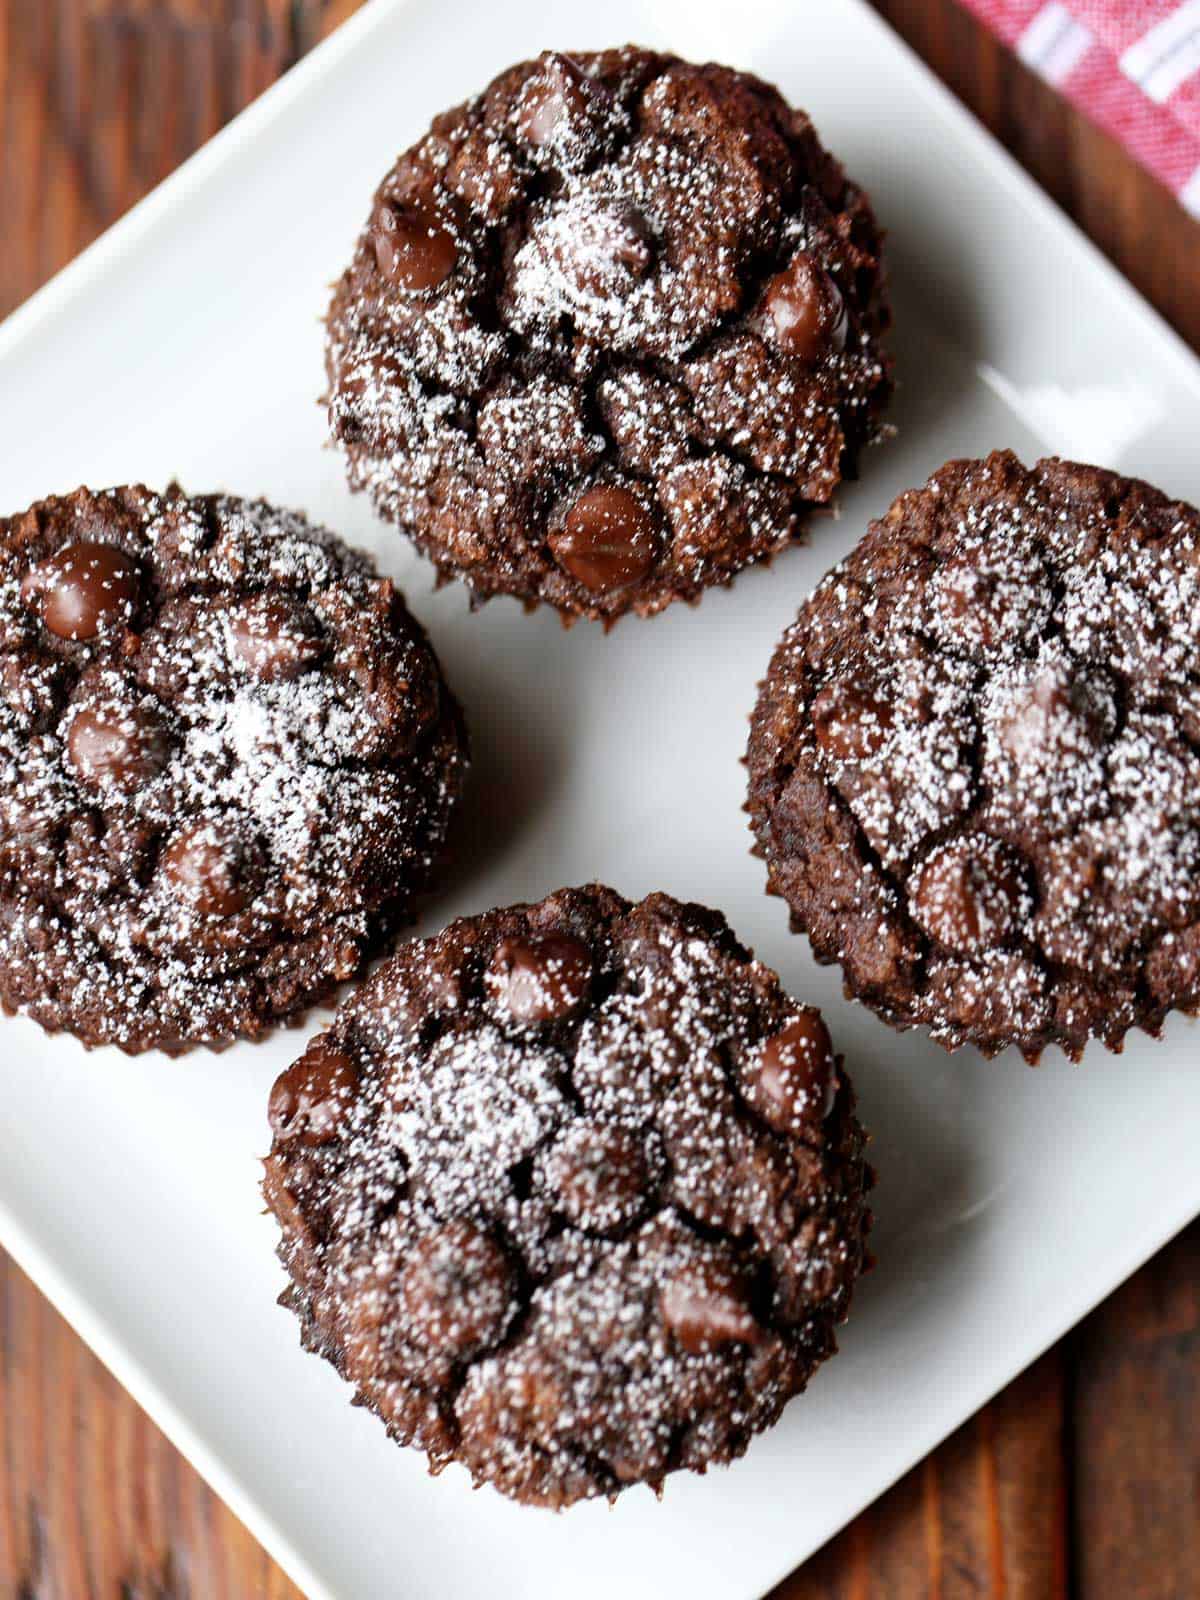 Four keto chocolate muffins are served on a white plate.